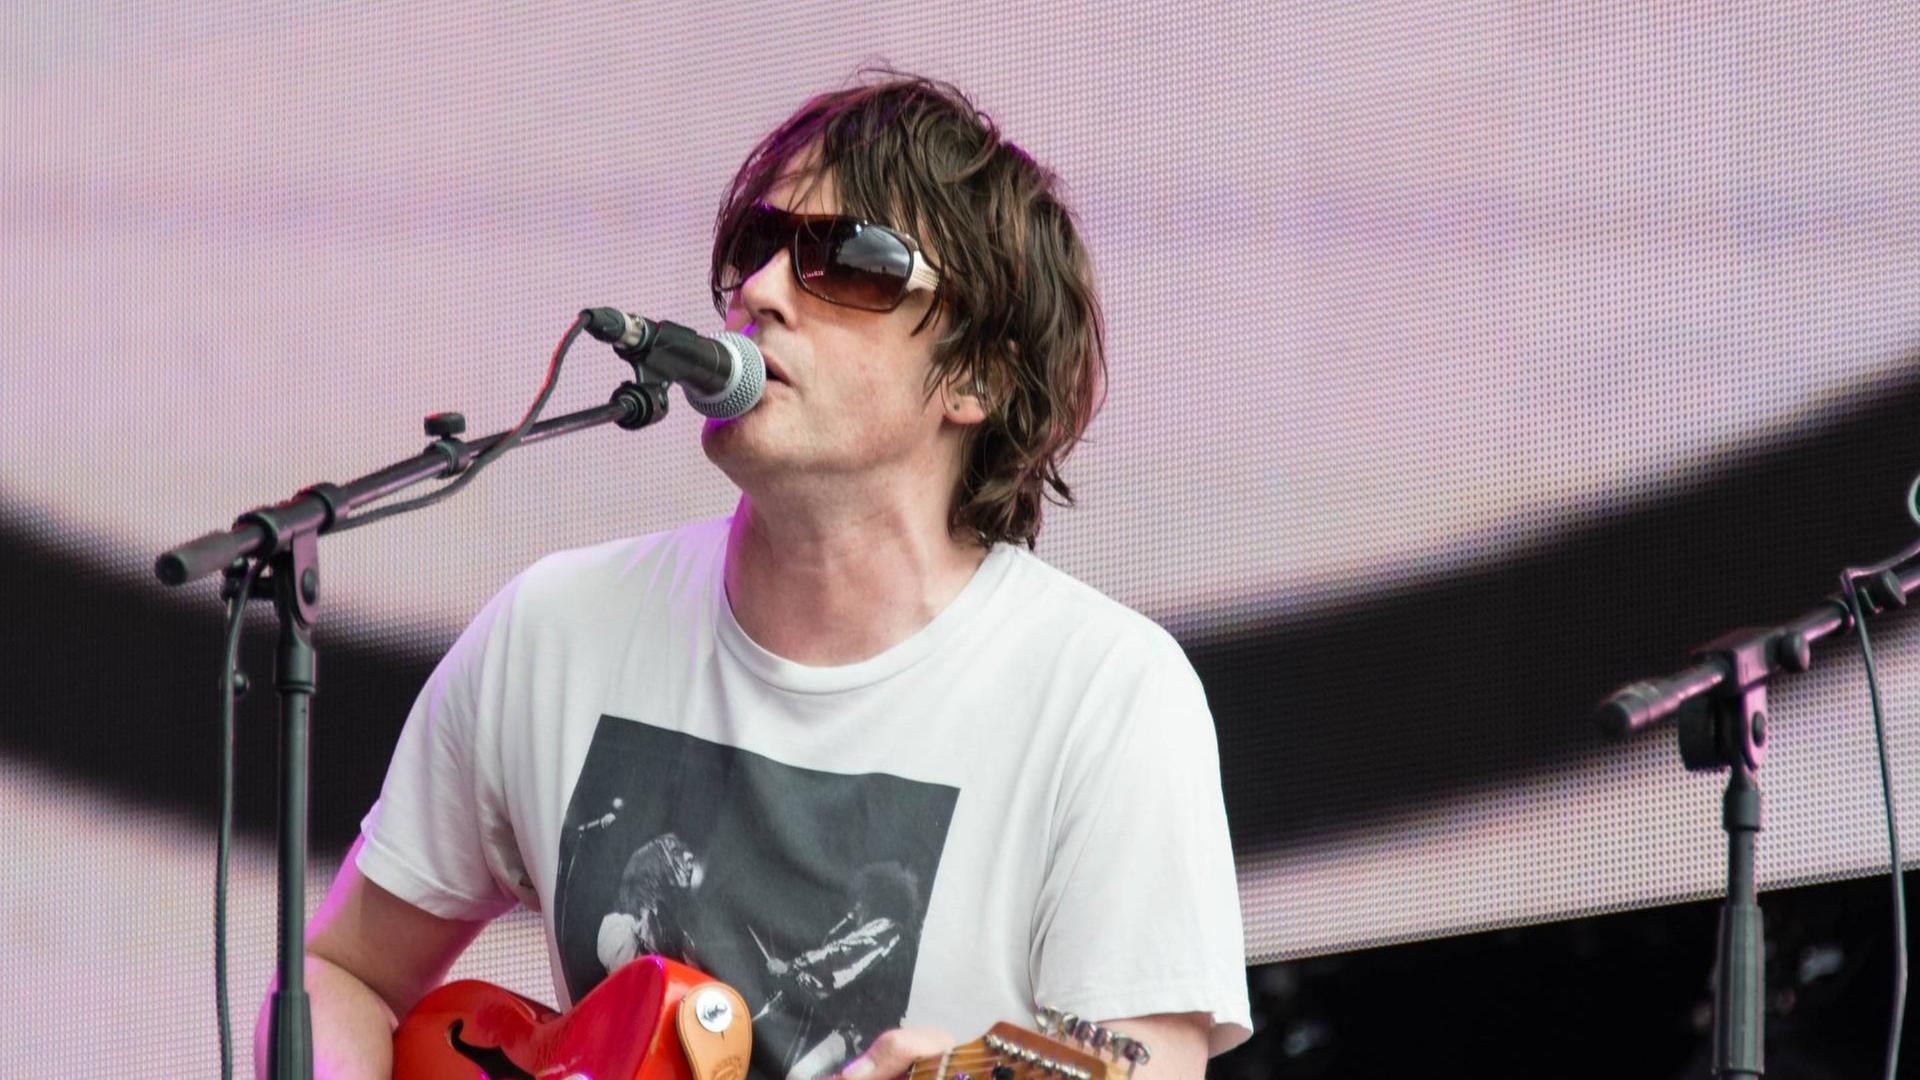 July 5, 2014 - London, London, UK - London, UK. Spiritualized performing live at Hyde Park. In this picture - Jason Pierce (also known as J Spaceman). The band are supporting headline act The Libertines as part of the Barclaycard British Summer Time series of music events held at Hyde Park this summer. Photo credit : Richard Isaac/LNP PUBLICATIONxINxGERxSUIxAUTxONLY - ZUMAl94 July 5 2014 London London UK London UK Spiritualized Performing Live AT Hyde Park in This Picture Jason Pierce Thus known As J Spaceman The Tie are Supporting Headline ACT The Libertines As Part of The Barclaycard British Summer Time Series of Music Events Hero AT Hyde Park This Summer Photo Credit Richard Isaac LNP PUBLICATIONxINxGERxSUIxAUTxONLY ZUMAl94